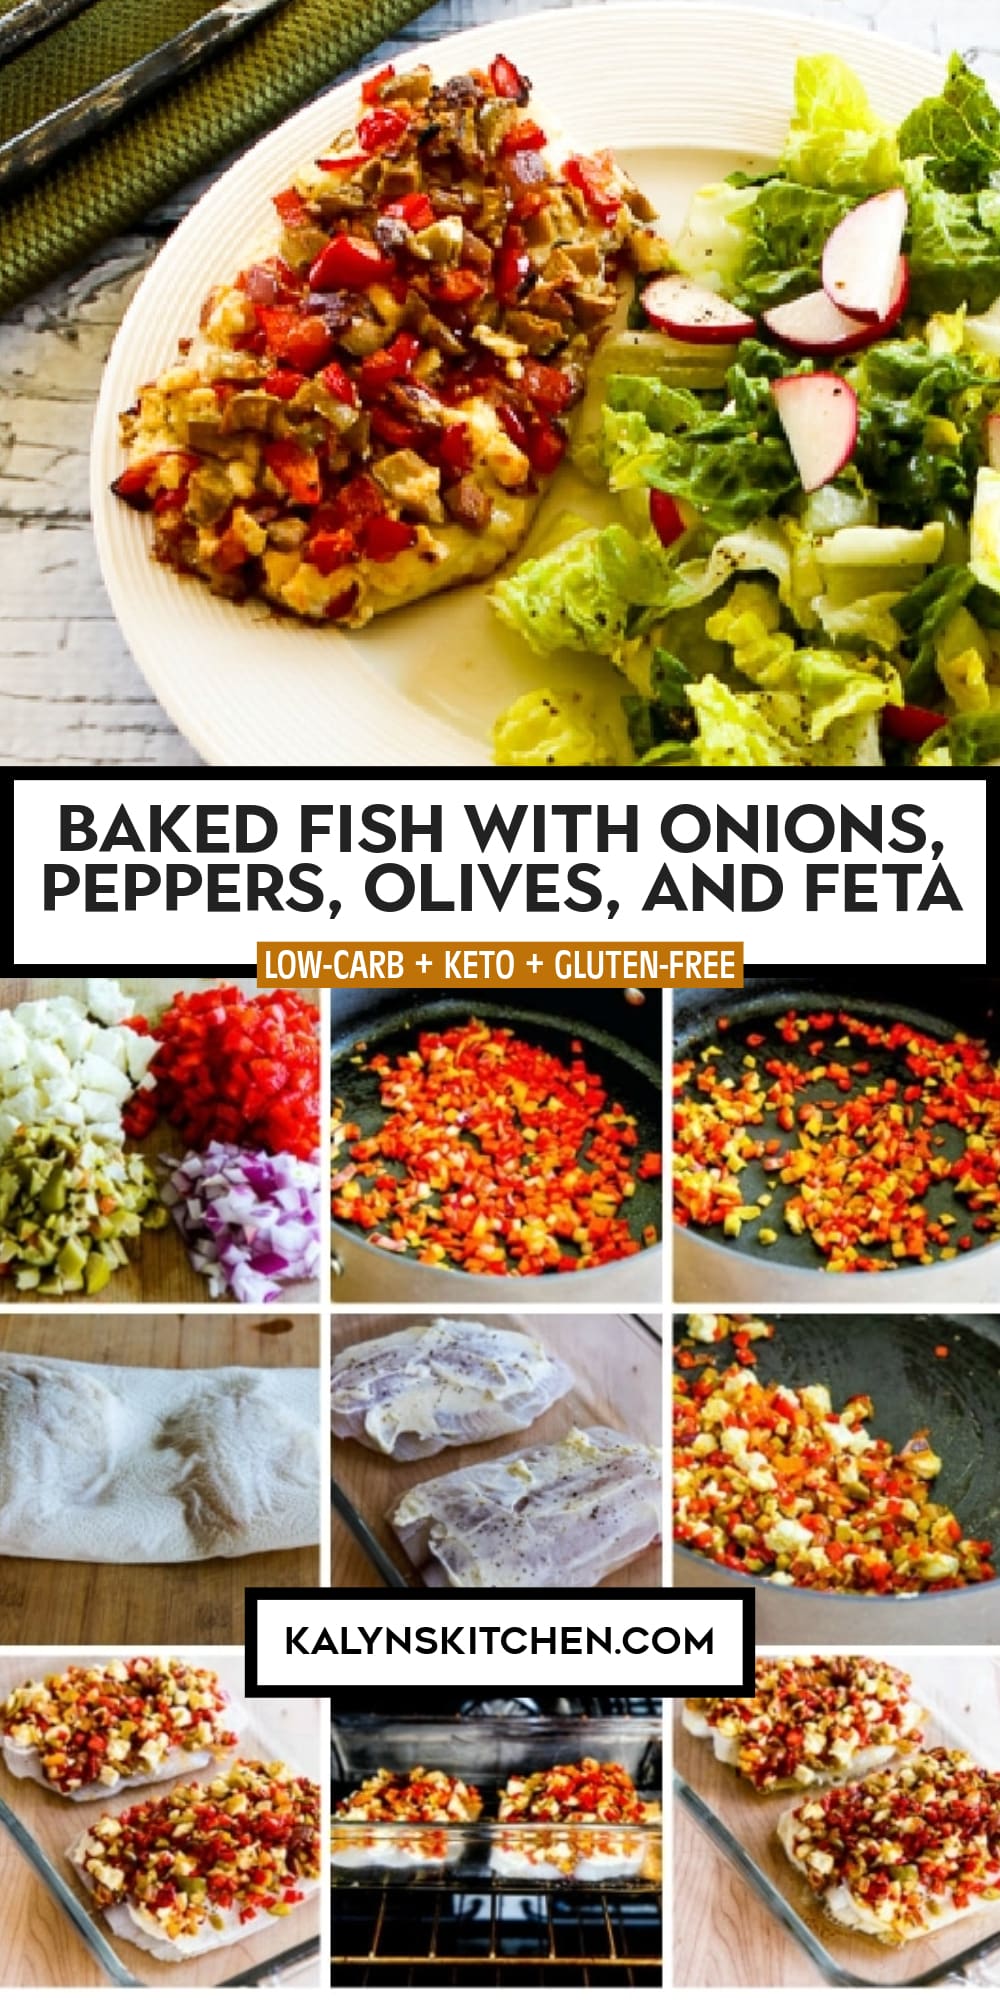 Pinterest image of Baked Fish with Onions, Peppers, Olives, and Feta